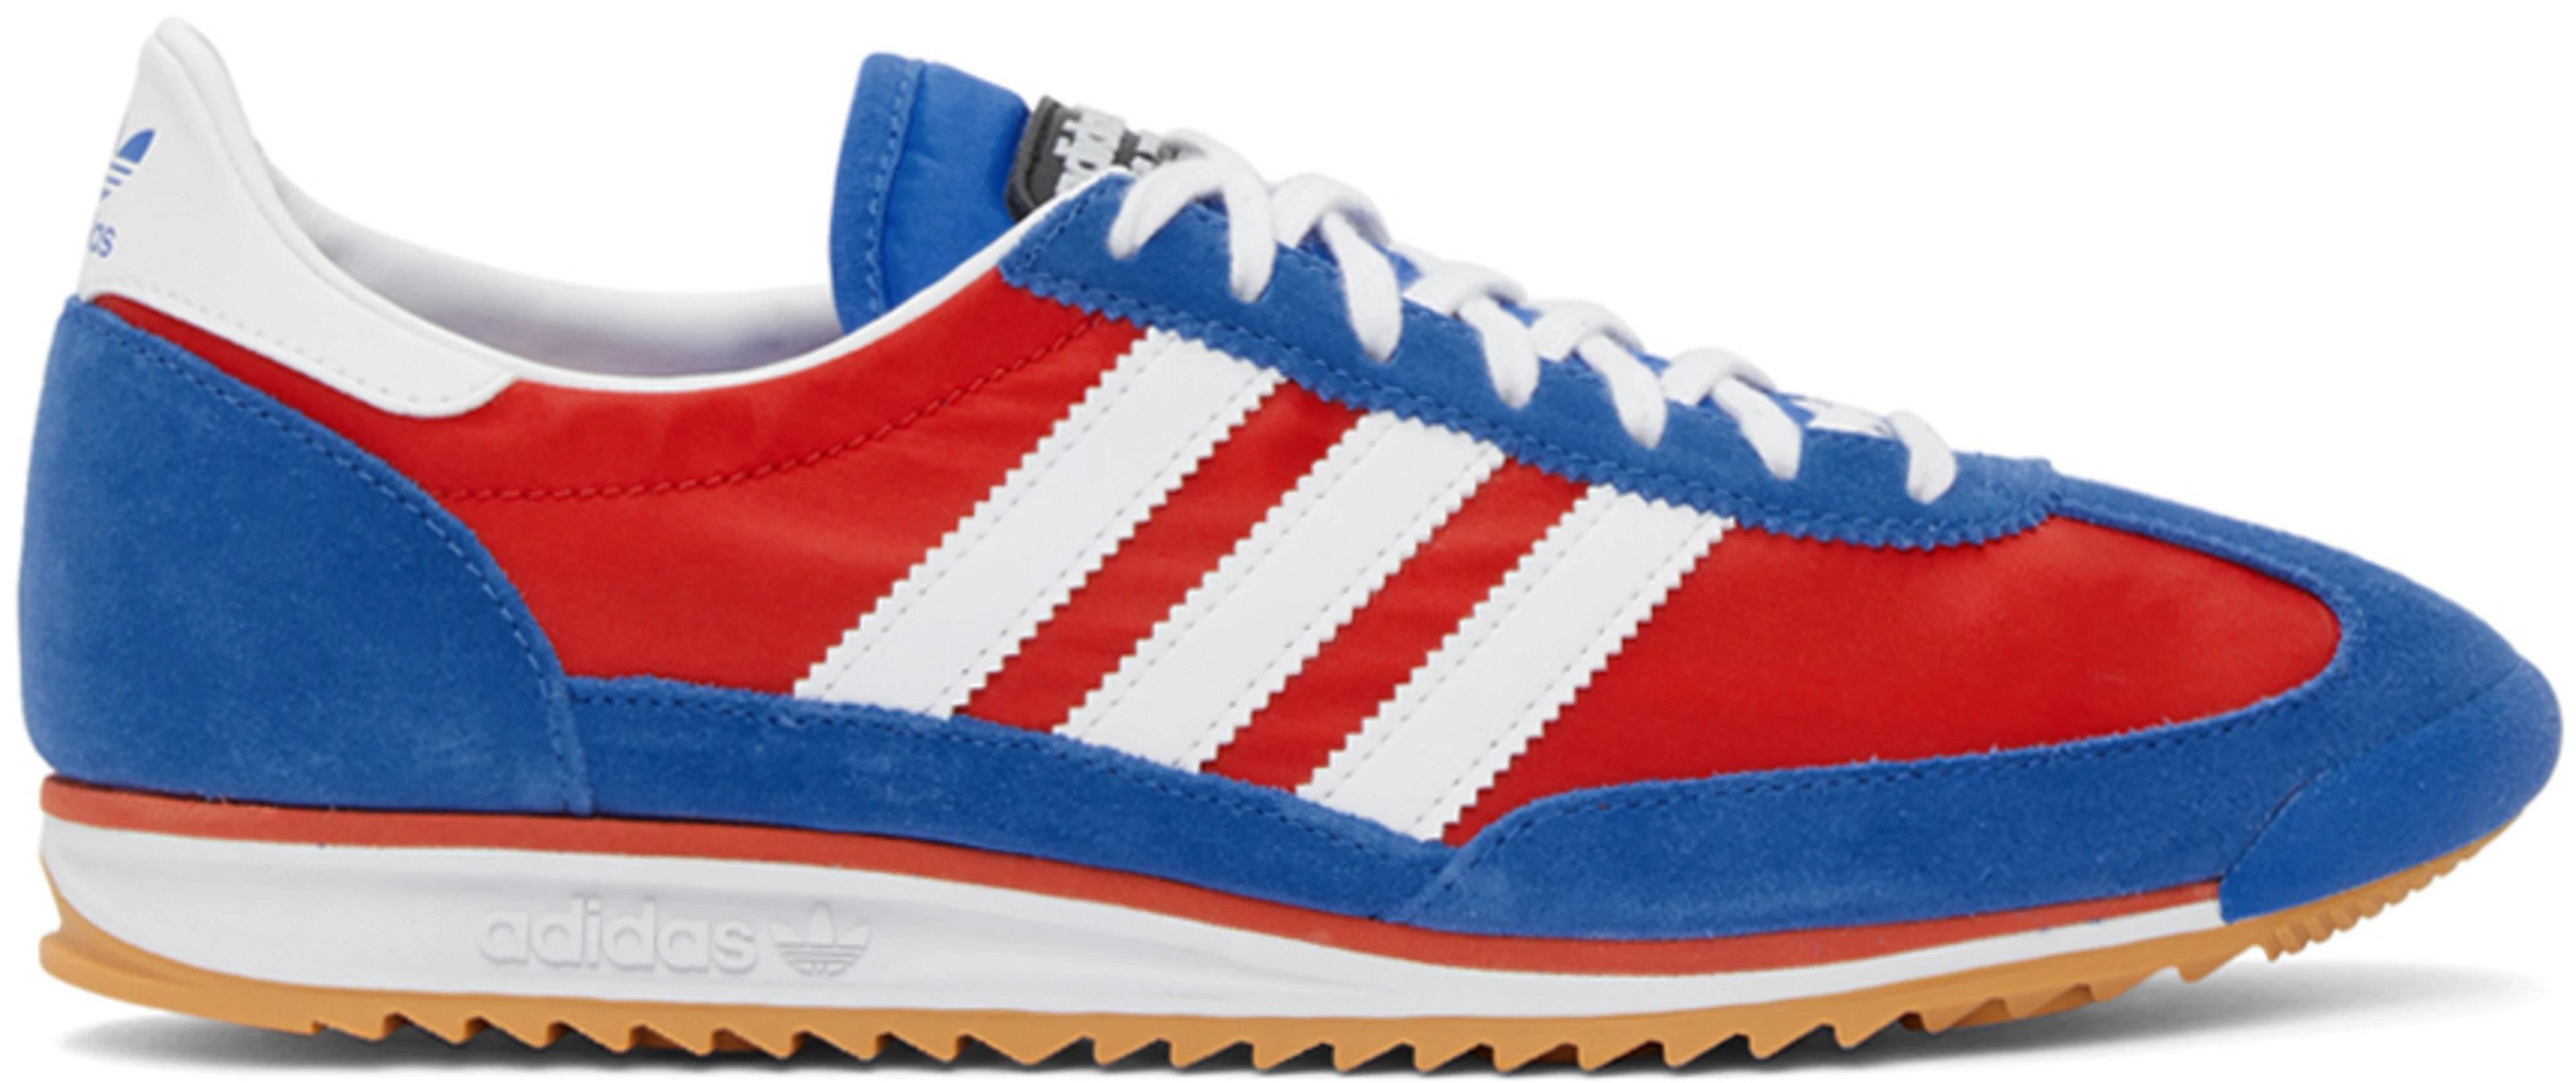 Red & Blue SL72 Low-Top Sneakers by ADIDAS LOTTA VOLKOVA